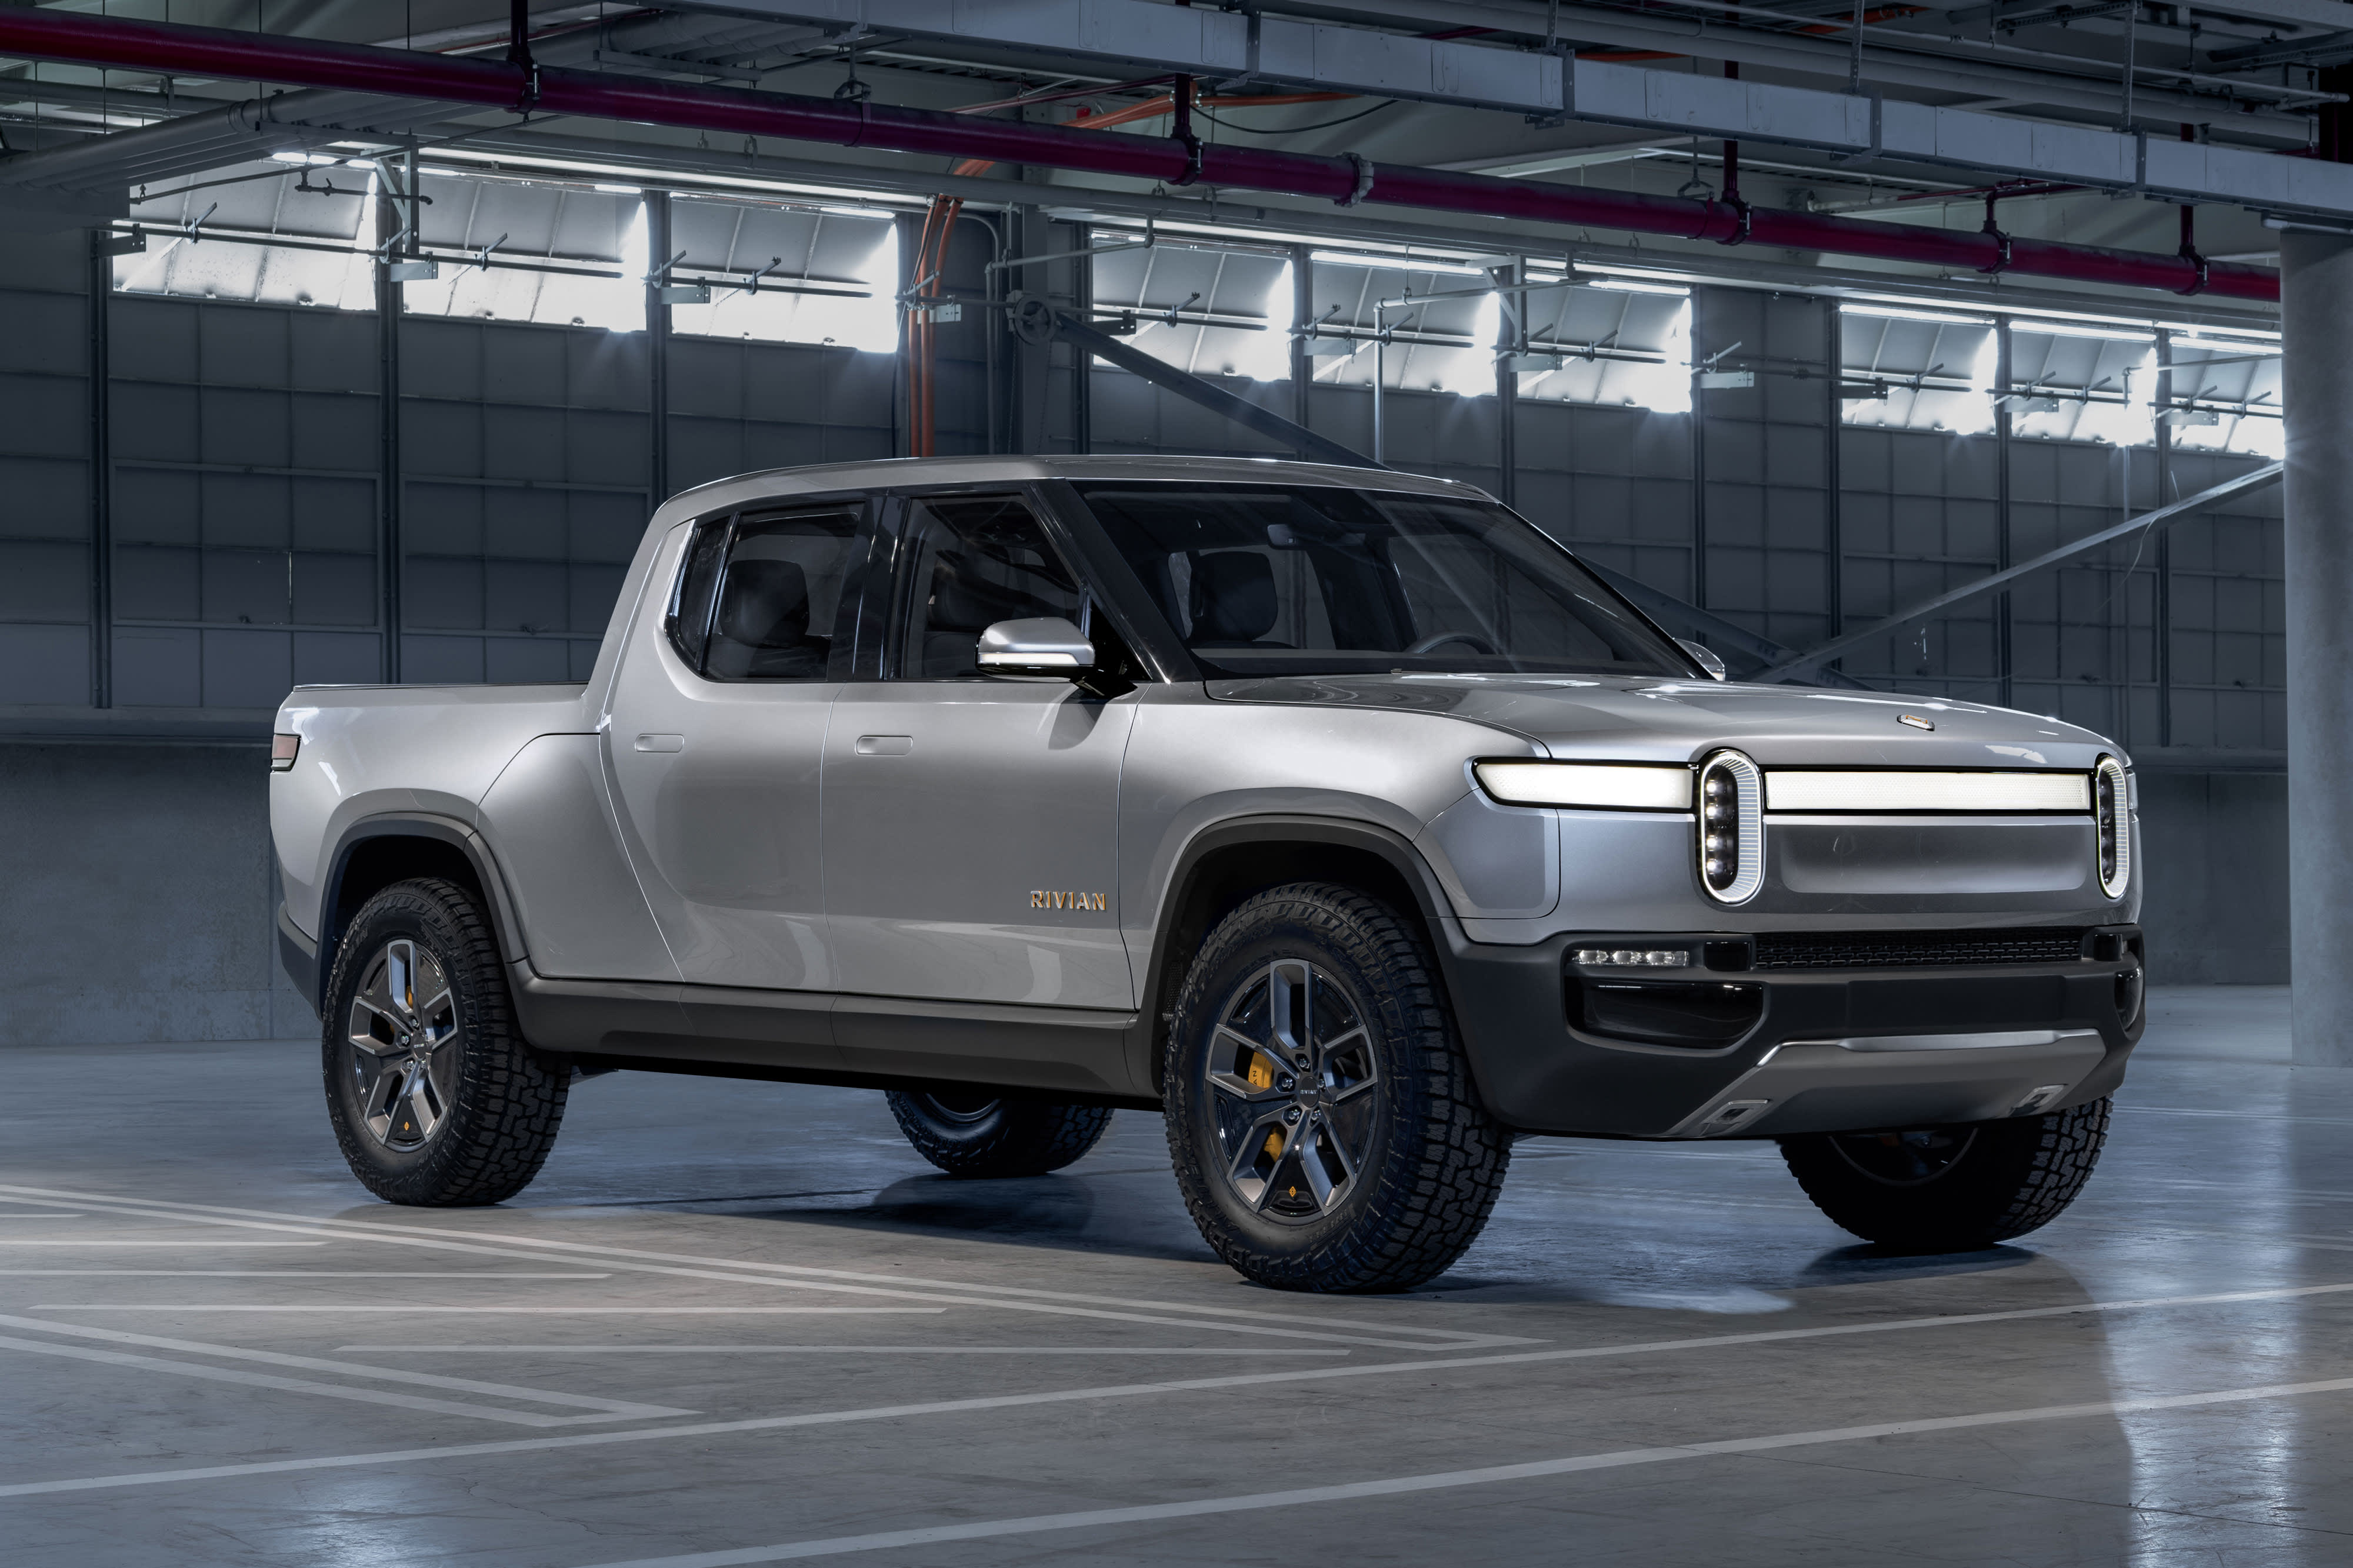 EV start-up Rivian beats Tesla, GM, Ford as first automaker to produce electric pickup